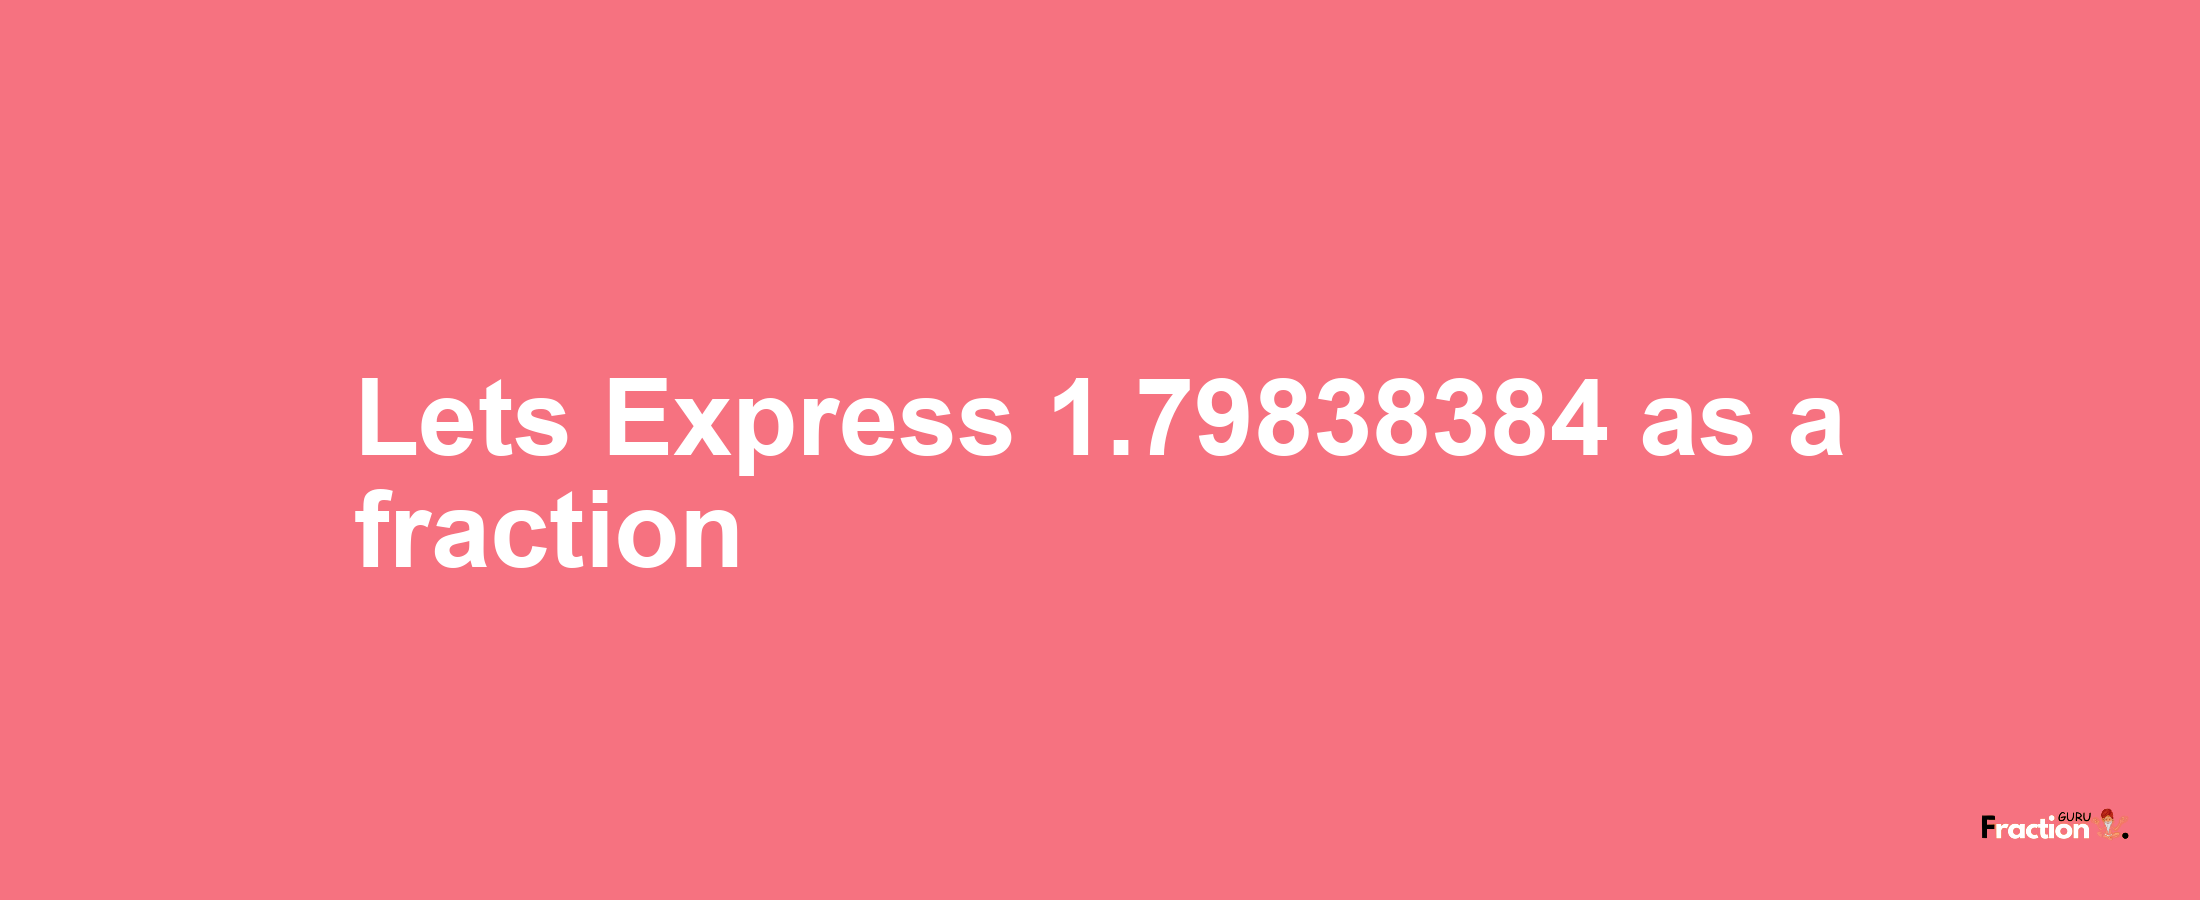 Lets Express 1.79838384 as afraction